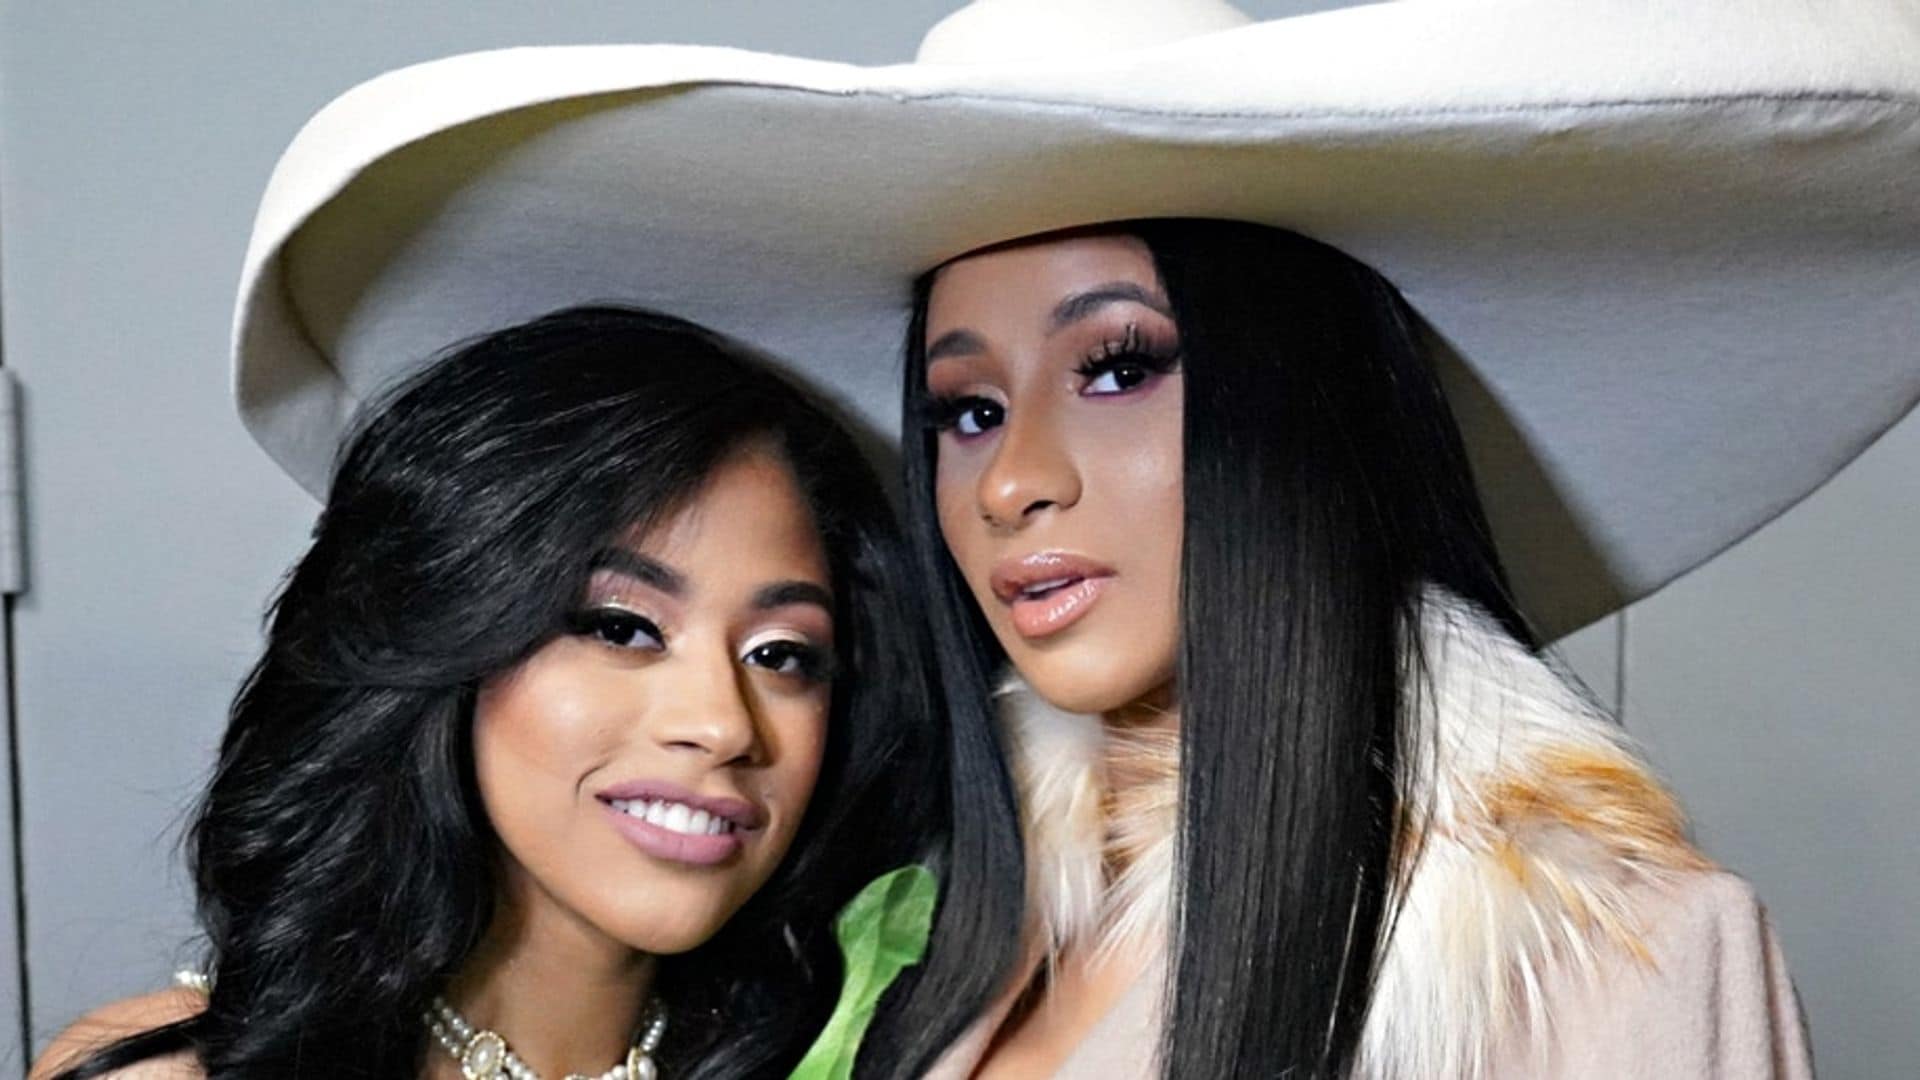 Cardi B and sister Hennessy Carolina steal the show at BeautyCon - see their looks!